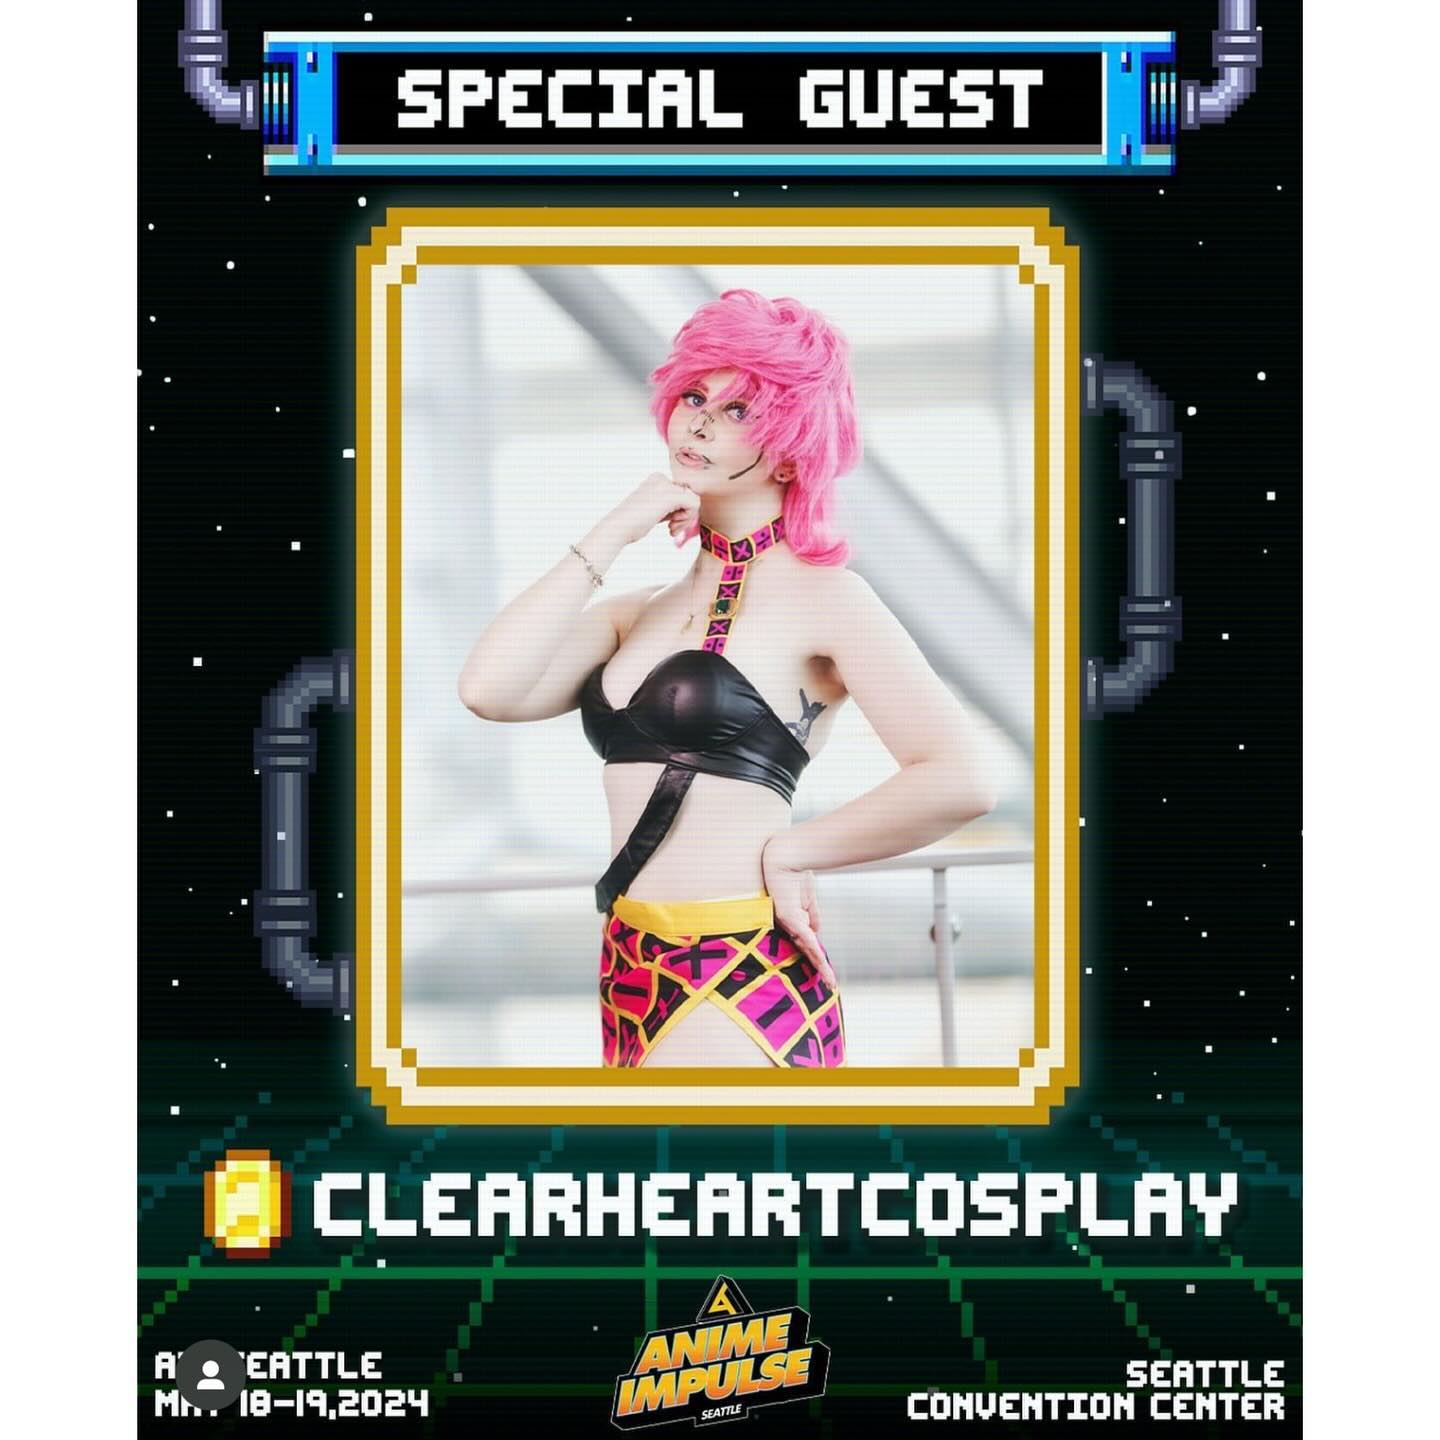 { swipe to see some of the other amazing cosplay guests that’ll be at @animeimpulse in a few weeks! So excited to see everyone! 🥺✨💖 }

{ 📆: May 18th-19th }
{ 📍: Seattle convention center }
{ 🎟️: http://animeimpulse.com/tickets }

{ #animeimpulse #cosplayguest #pnw #seattle #seattlewashington #cosplayer #convention #animeconvention }